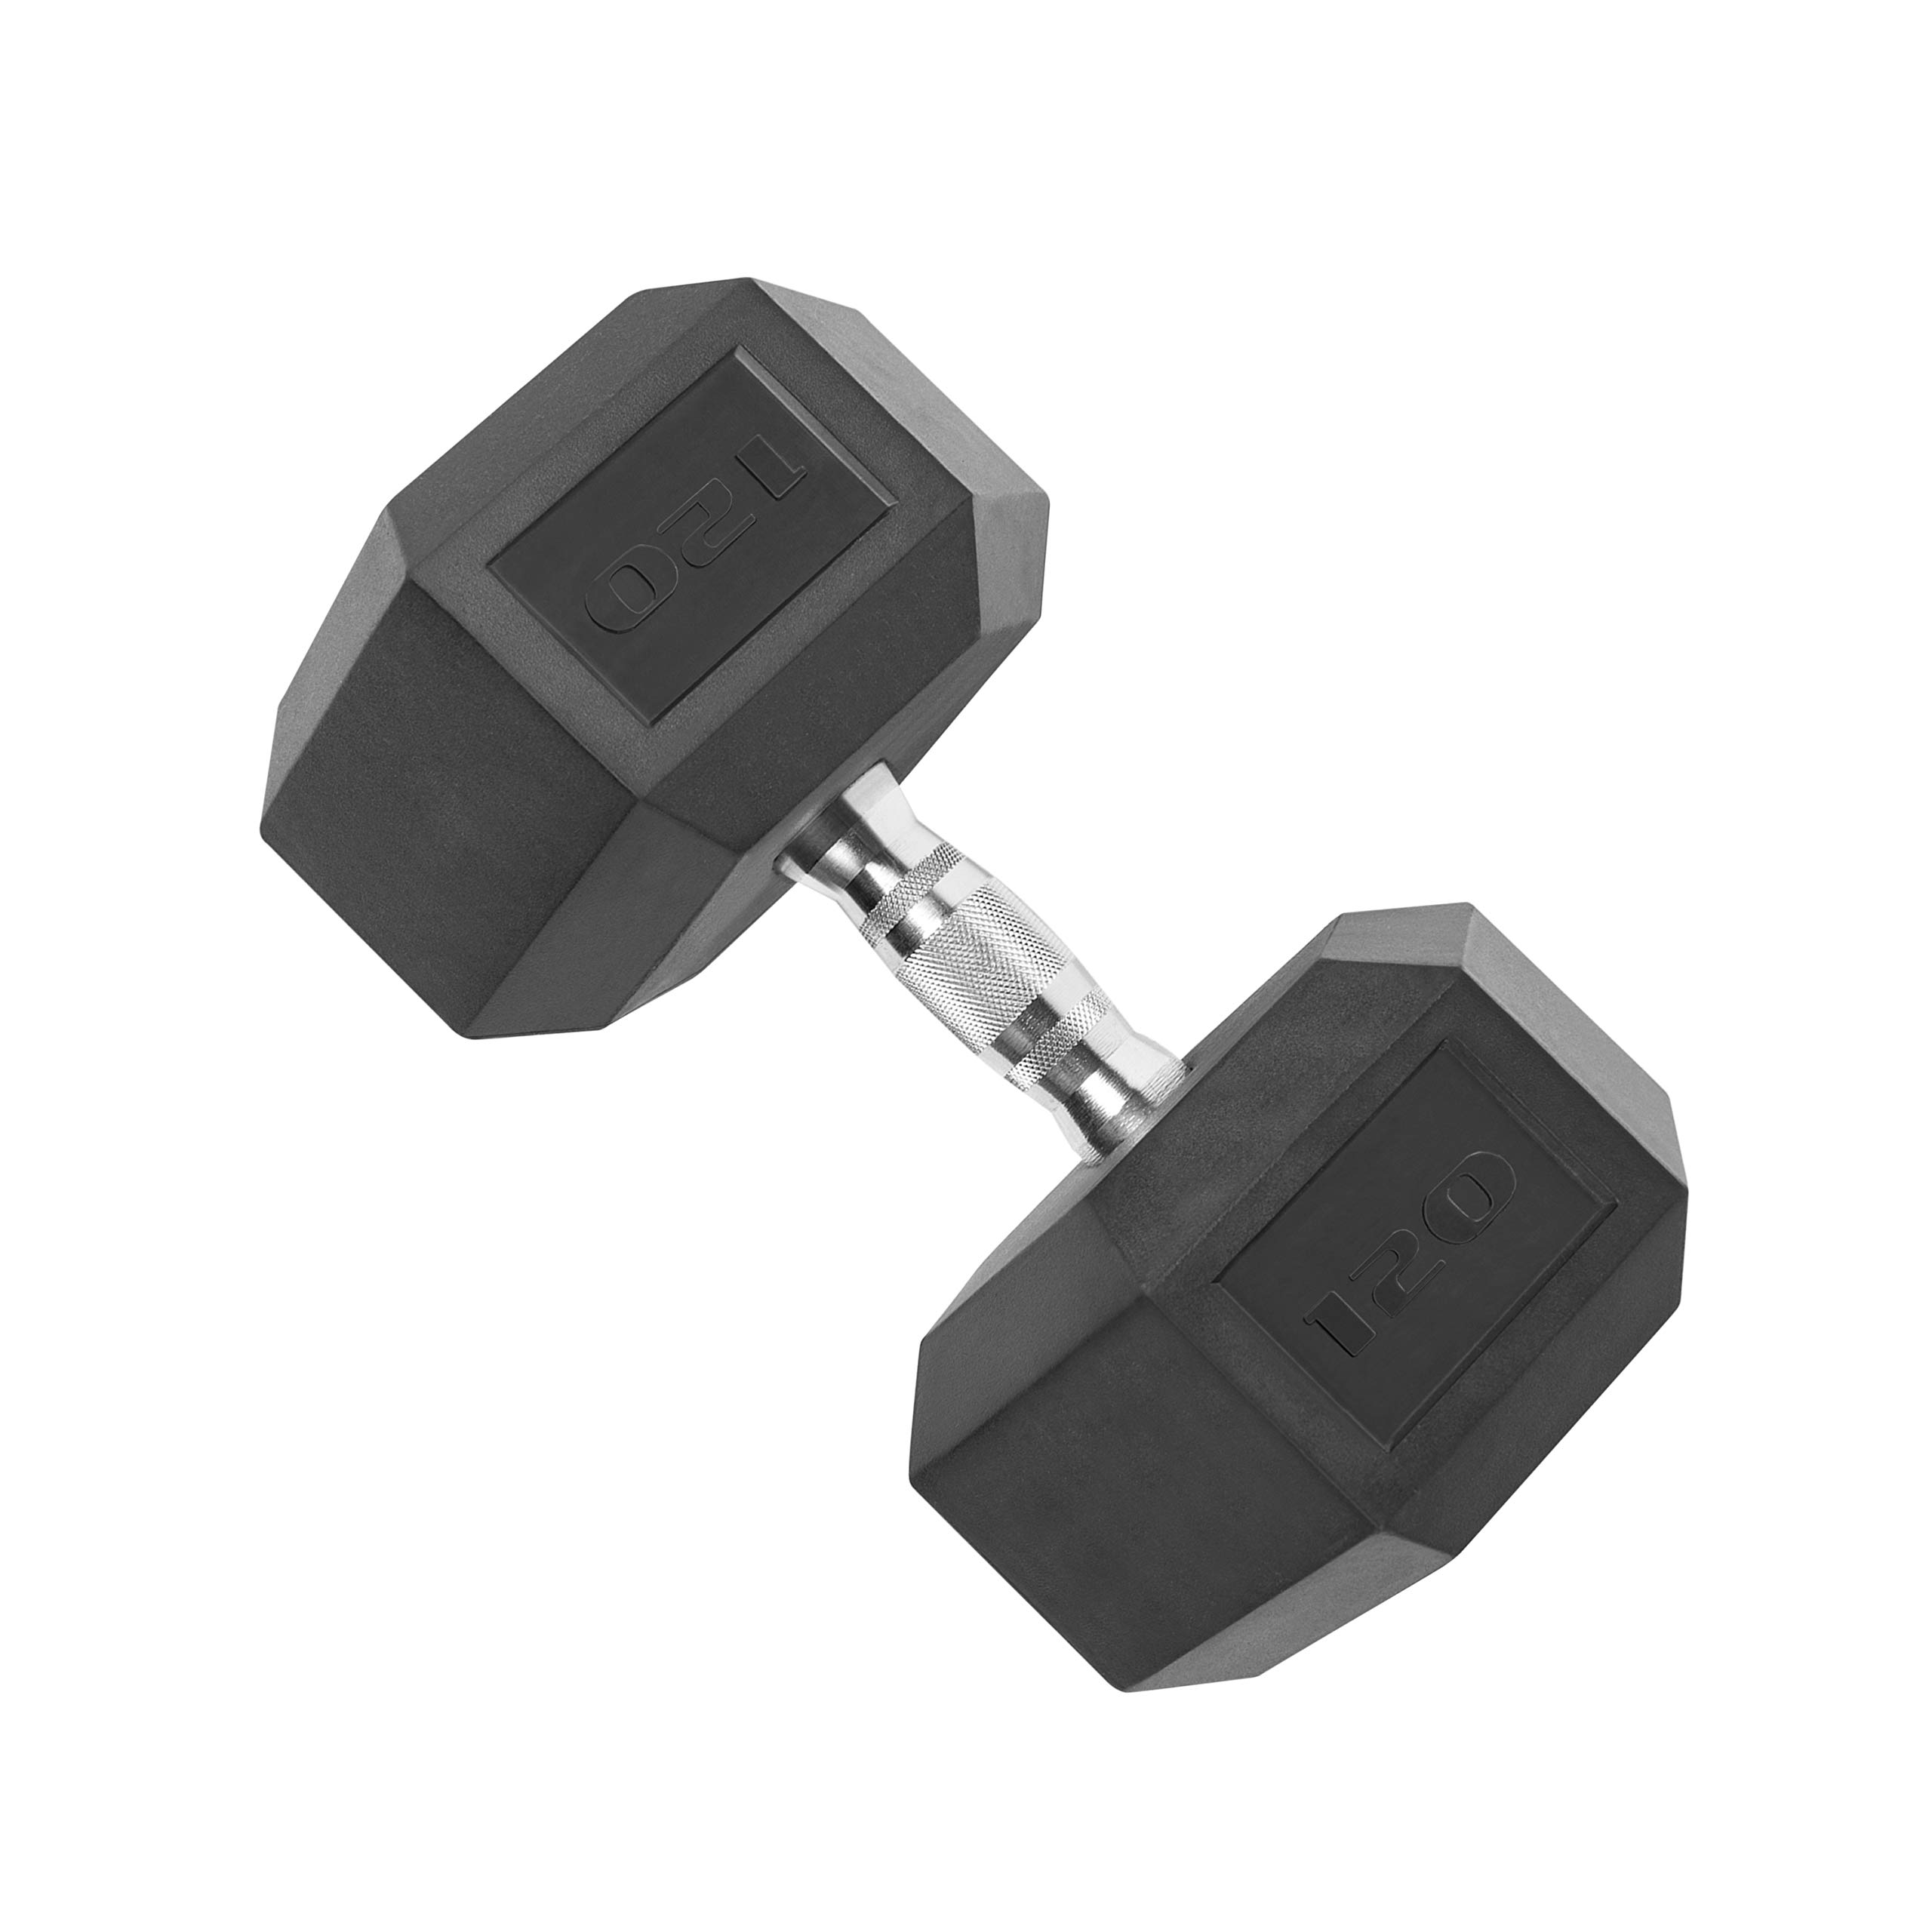 Cap Barbell cap 120 LB coated Hex Dumbbell Weight, New Edition, Black, (SDRIS-120)